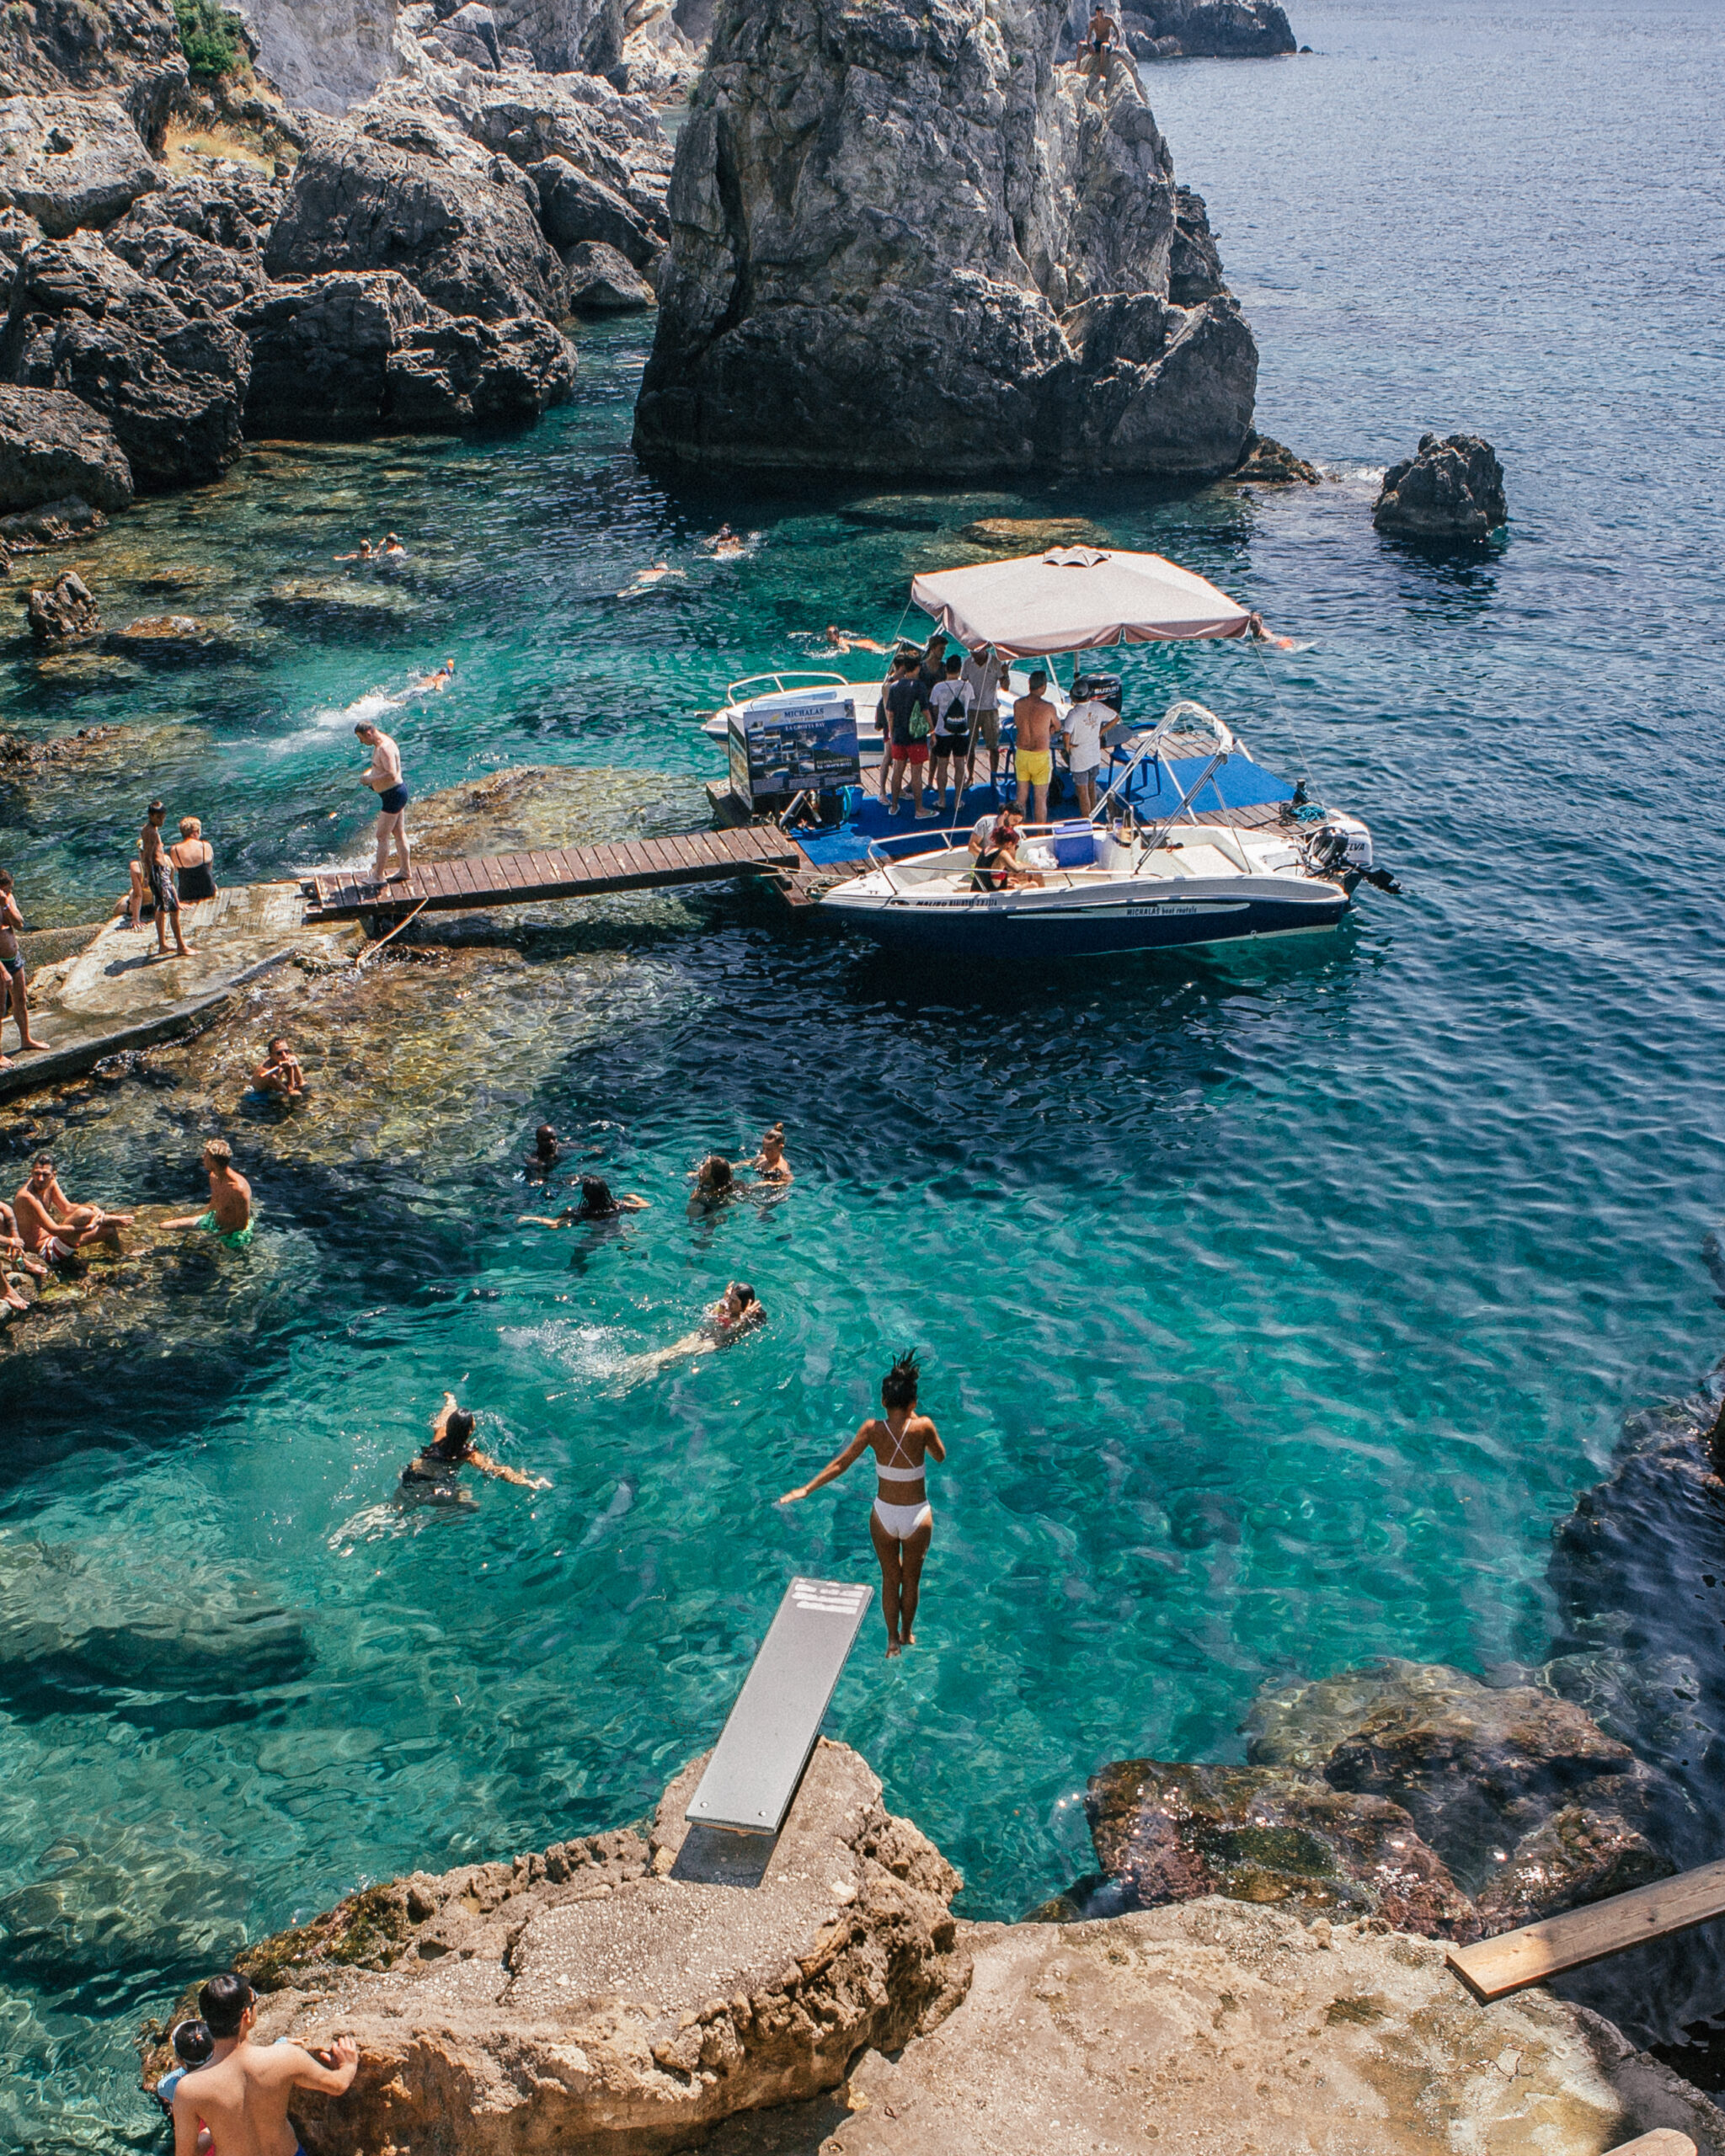 A complete travel guide to Corfu including the best beaches, cliff jumping, viewpoints, hotels, restaurants and more.